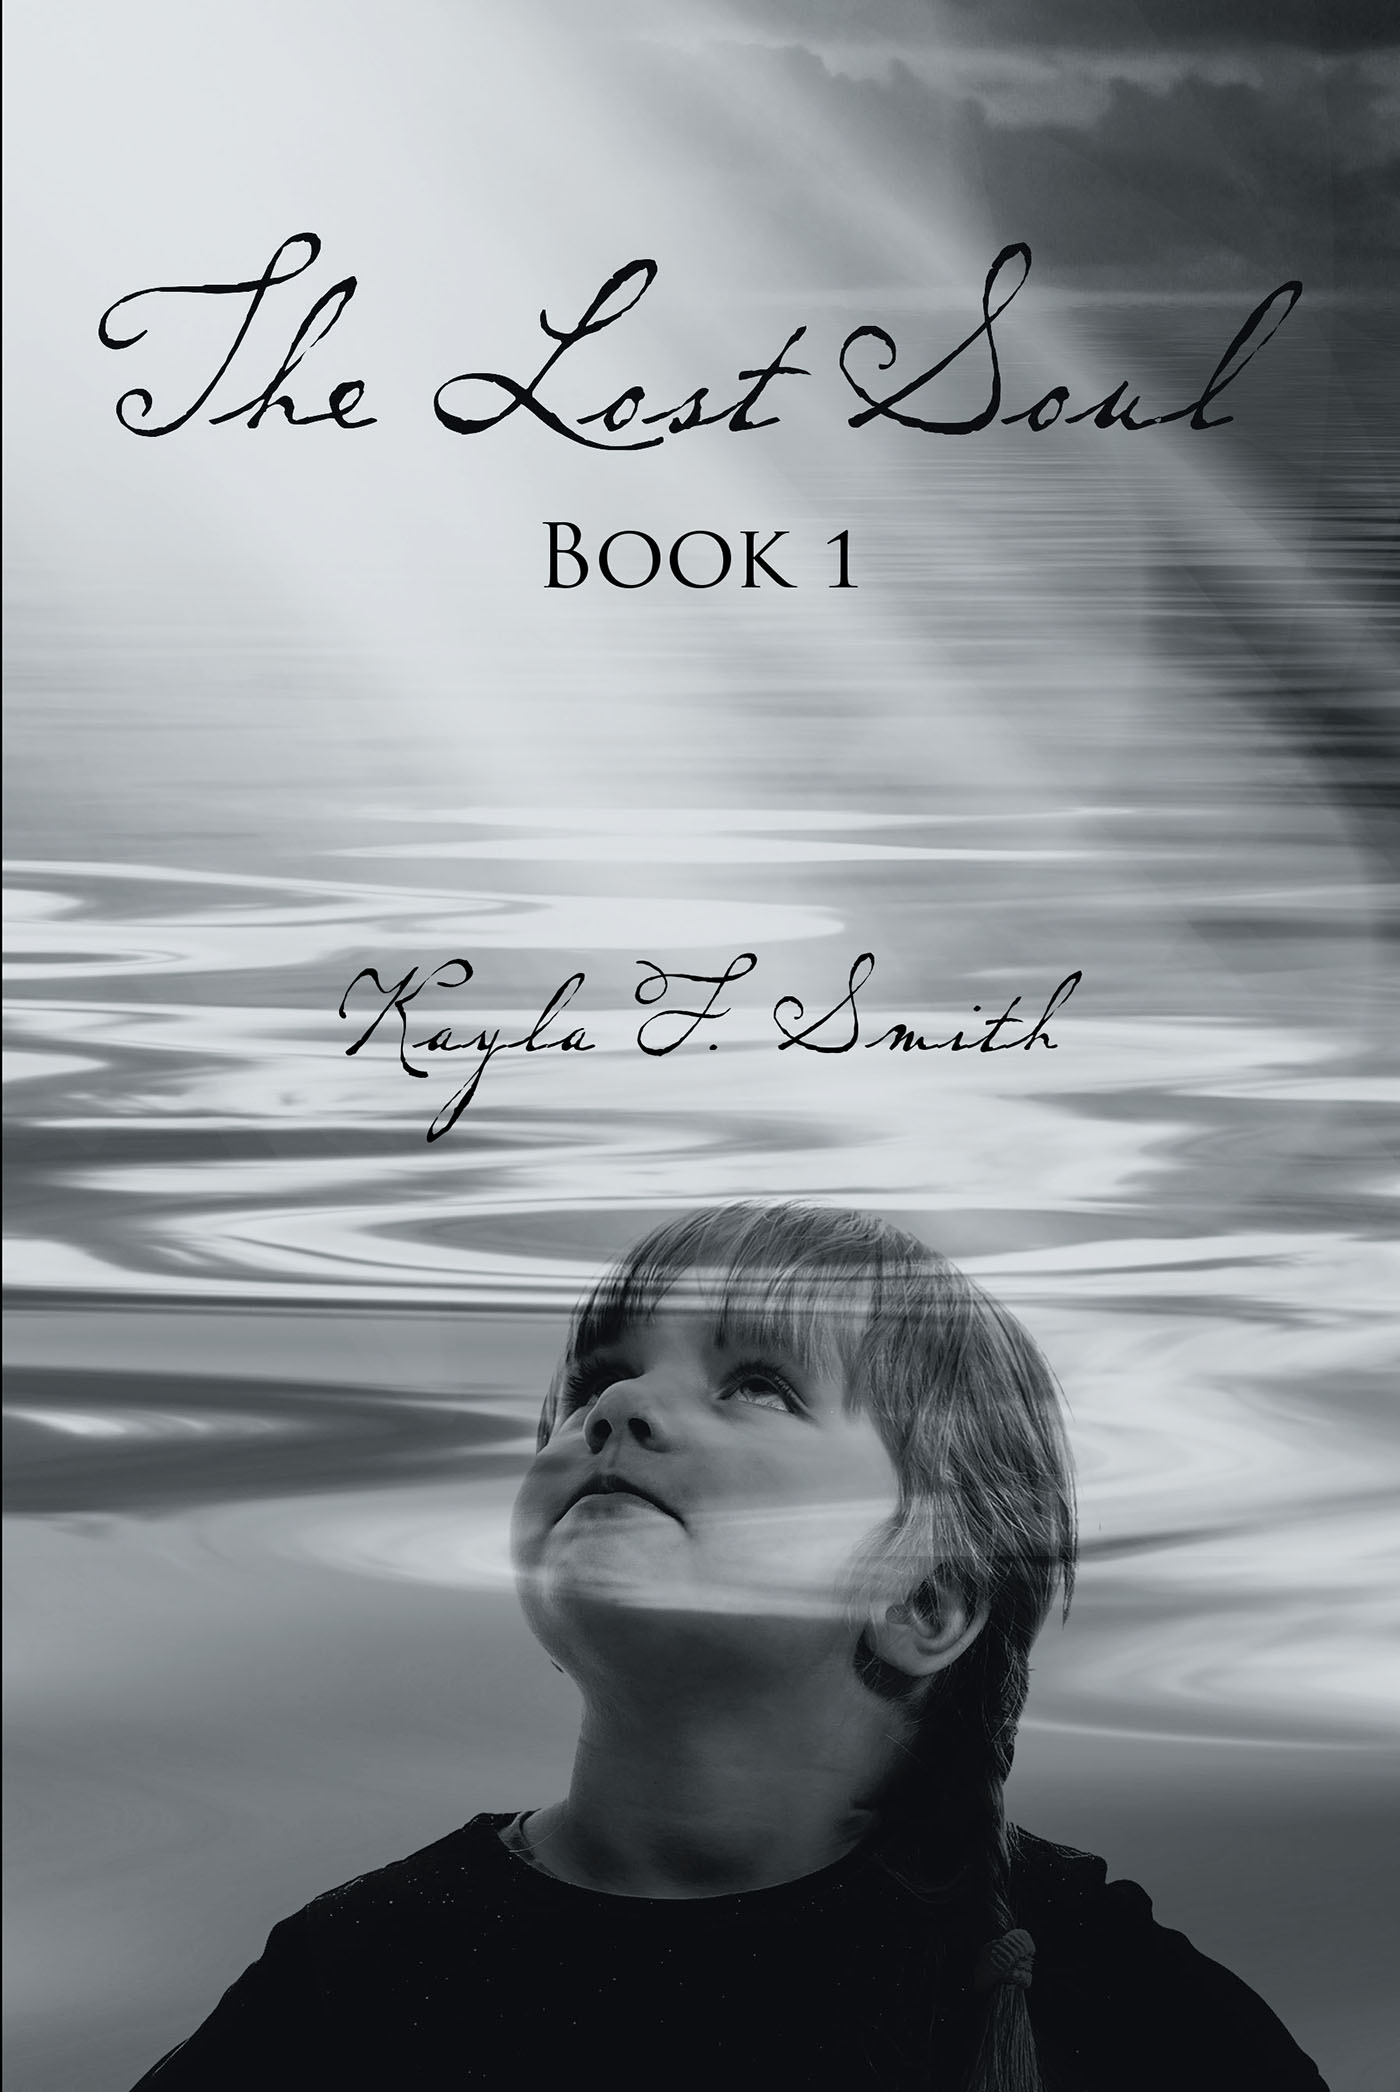 Kayla F. Smith’s Newly Released "The Lost Soul: Book 1" is an Engaging Novella That Explores the Lasting Effects of Abuse and the Power of Breaking Free